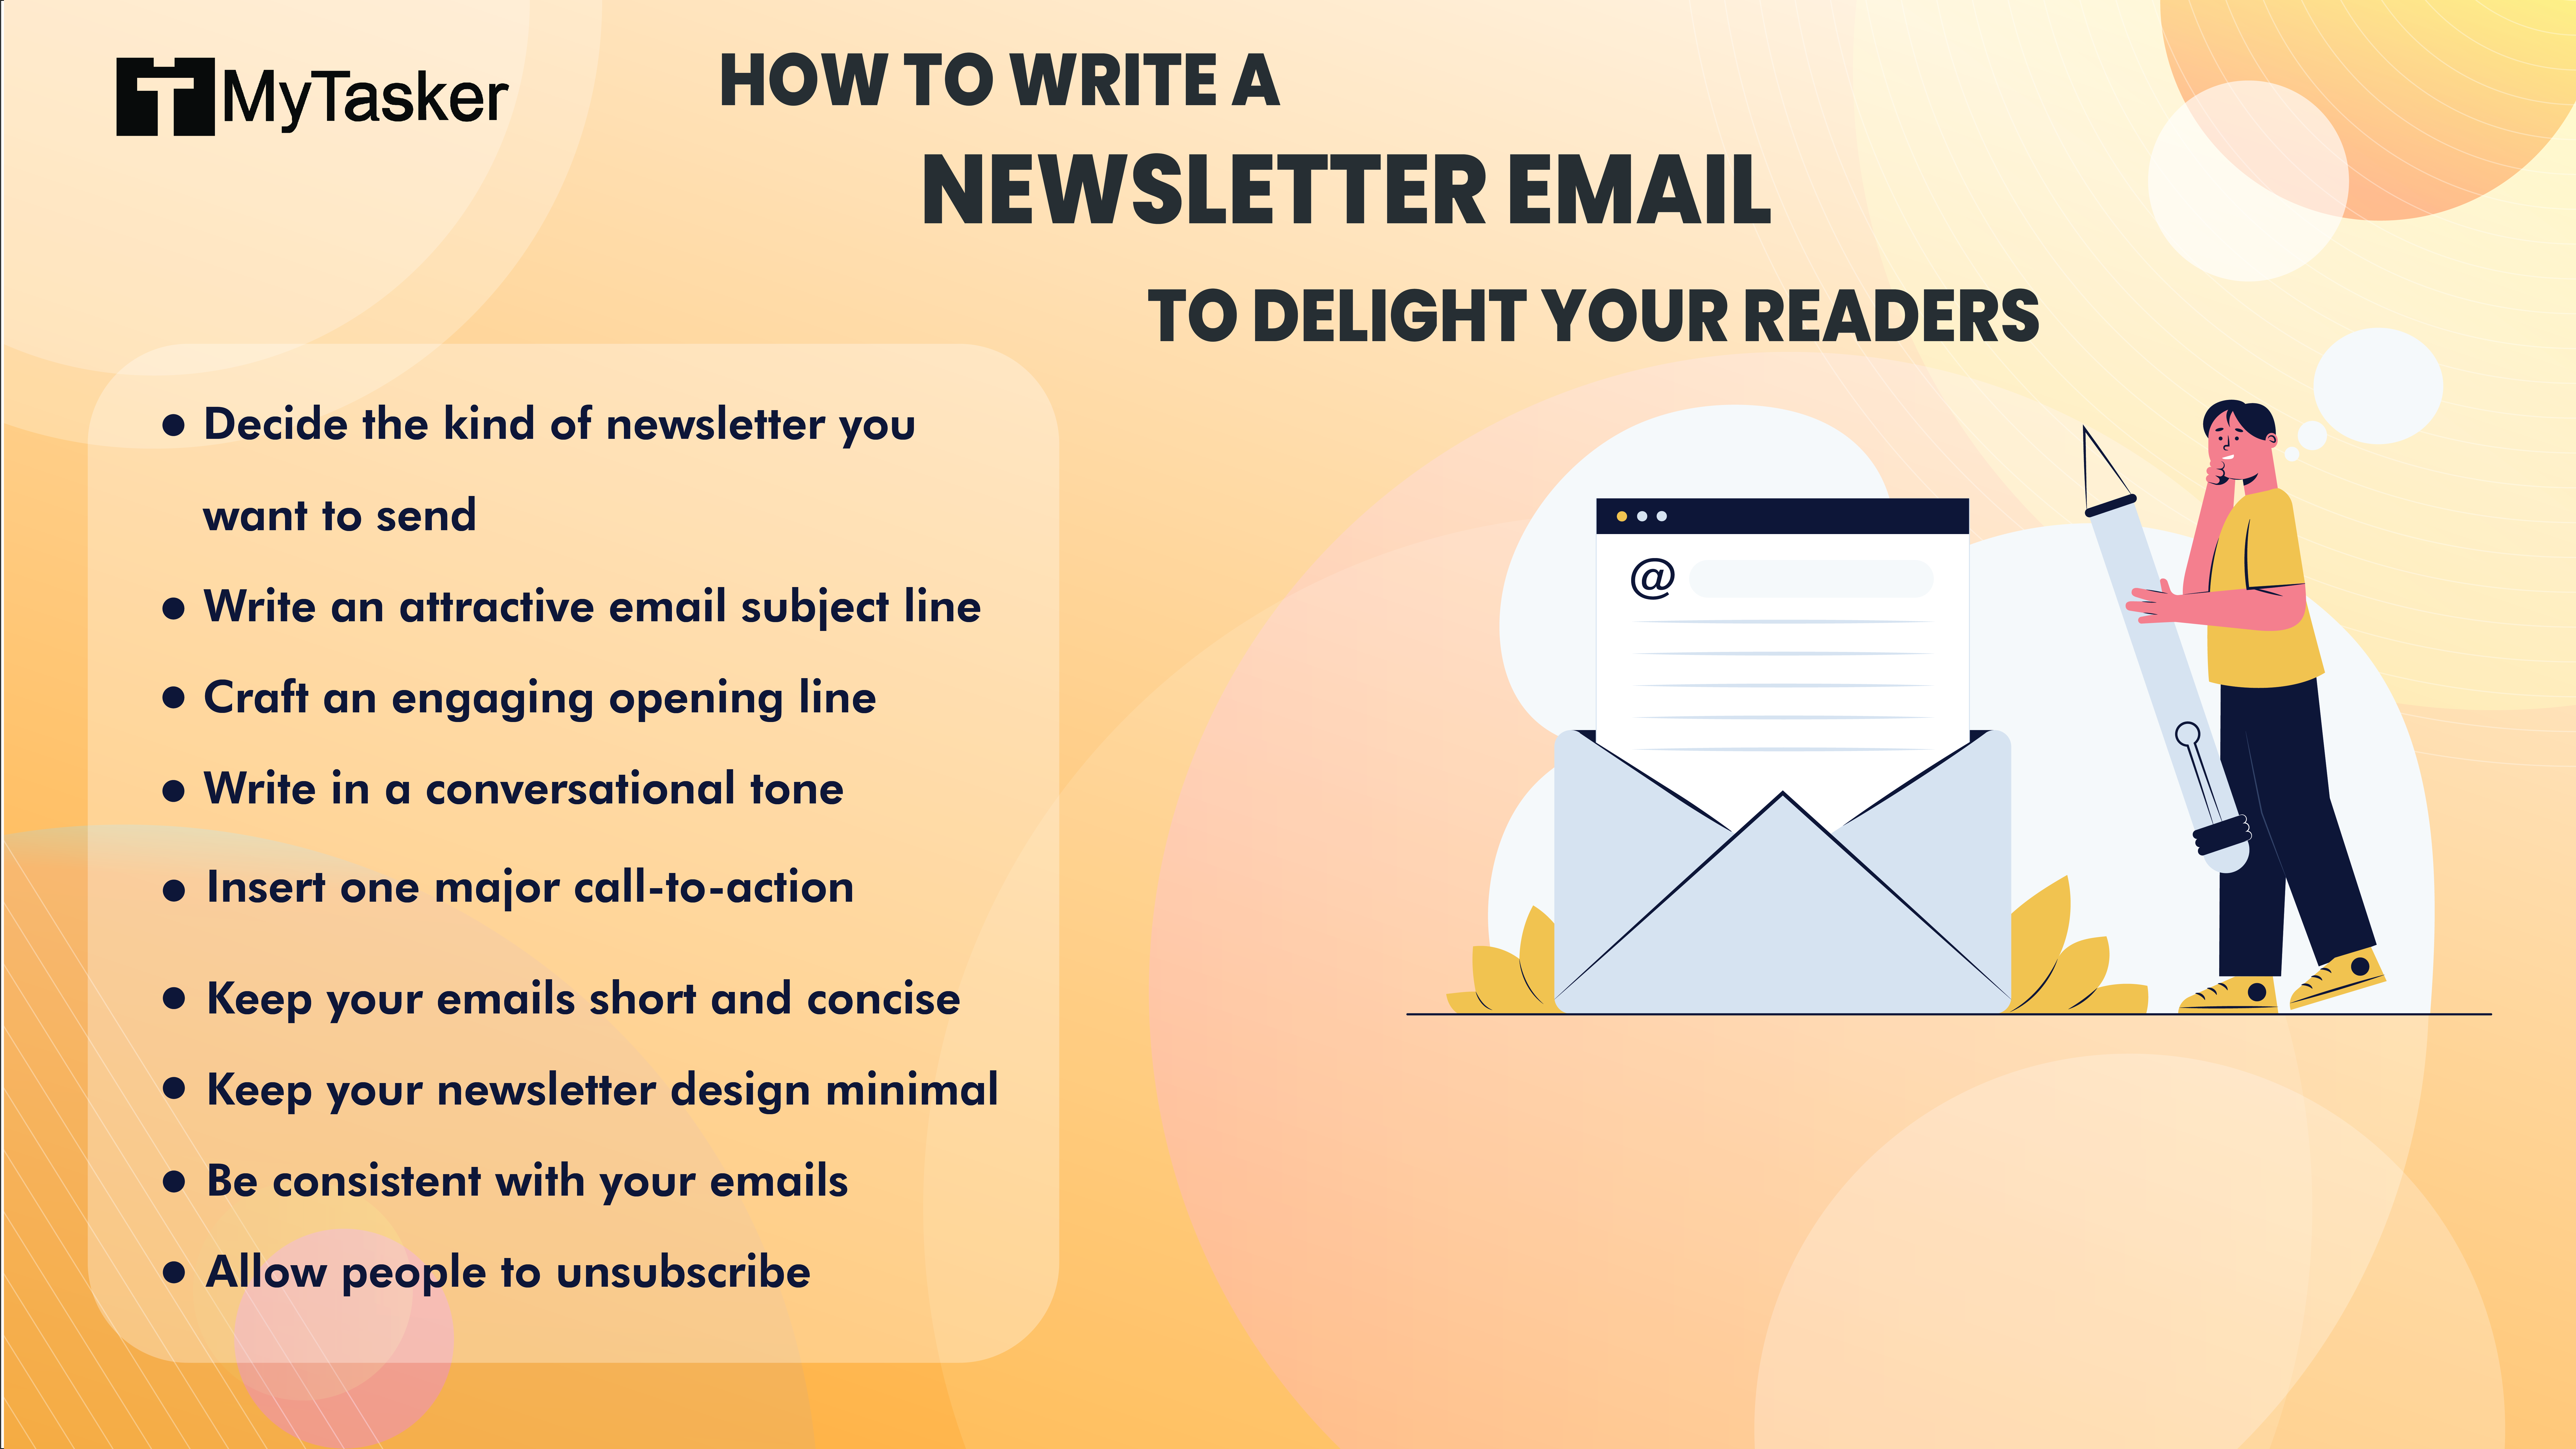 How To Write A Newsletter Email to Delight Your Readers [+ Examples]